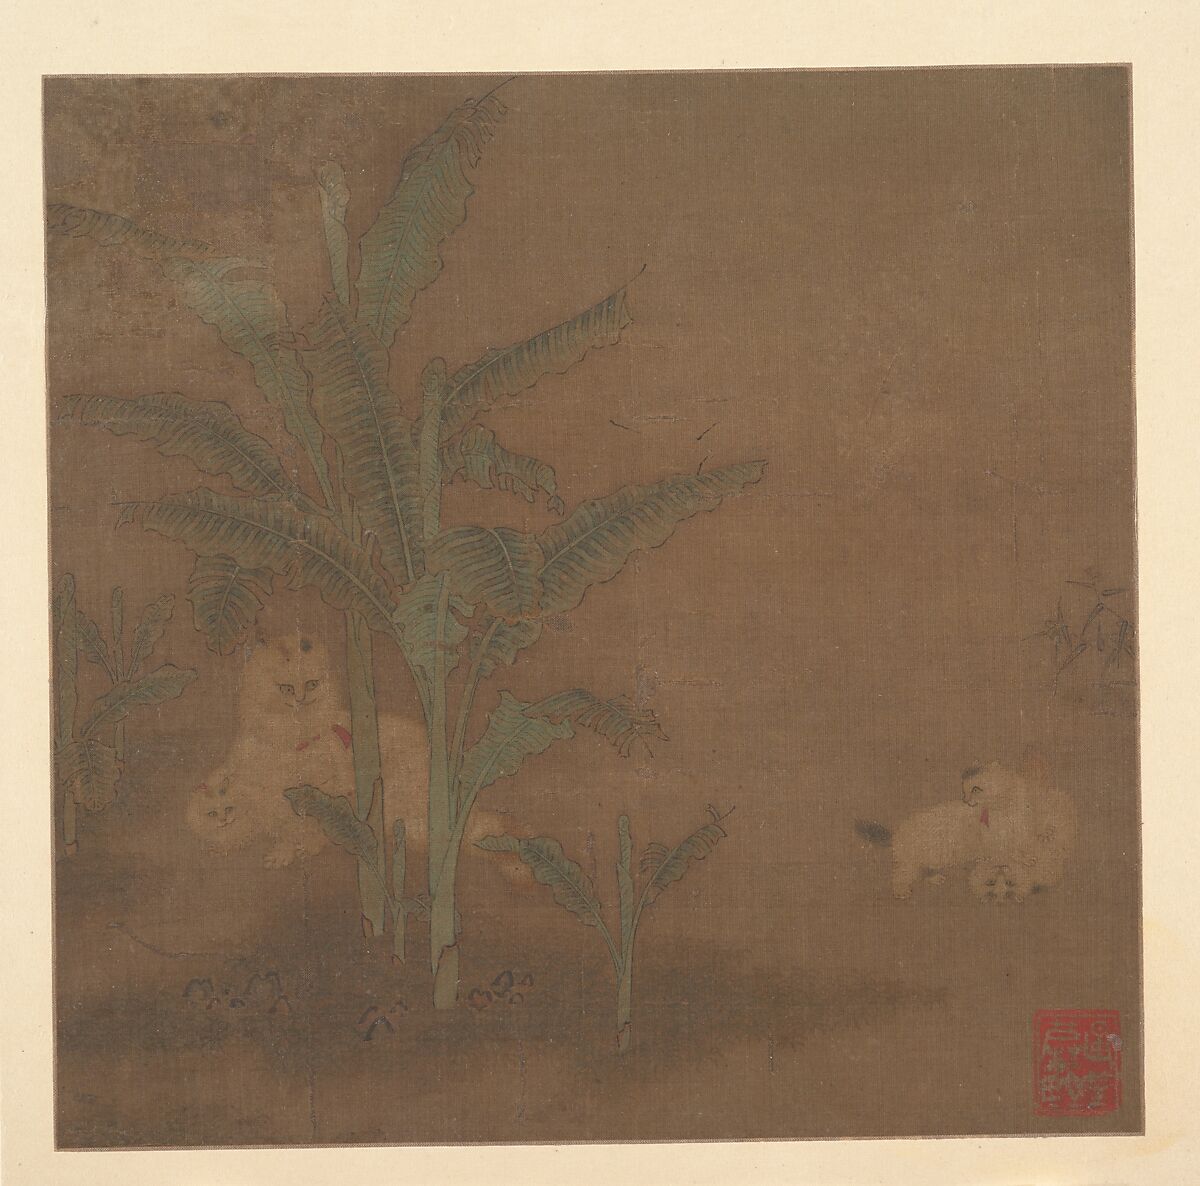 Frolicking Kittens under a Banana Tree, Unidentified artist, Album leaf; ink and color on silk, China 